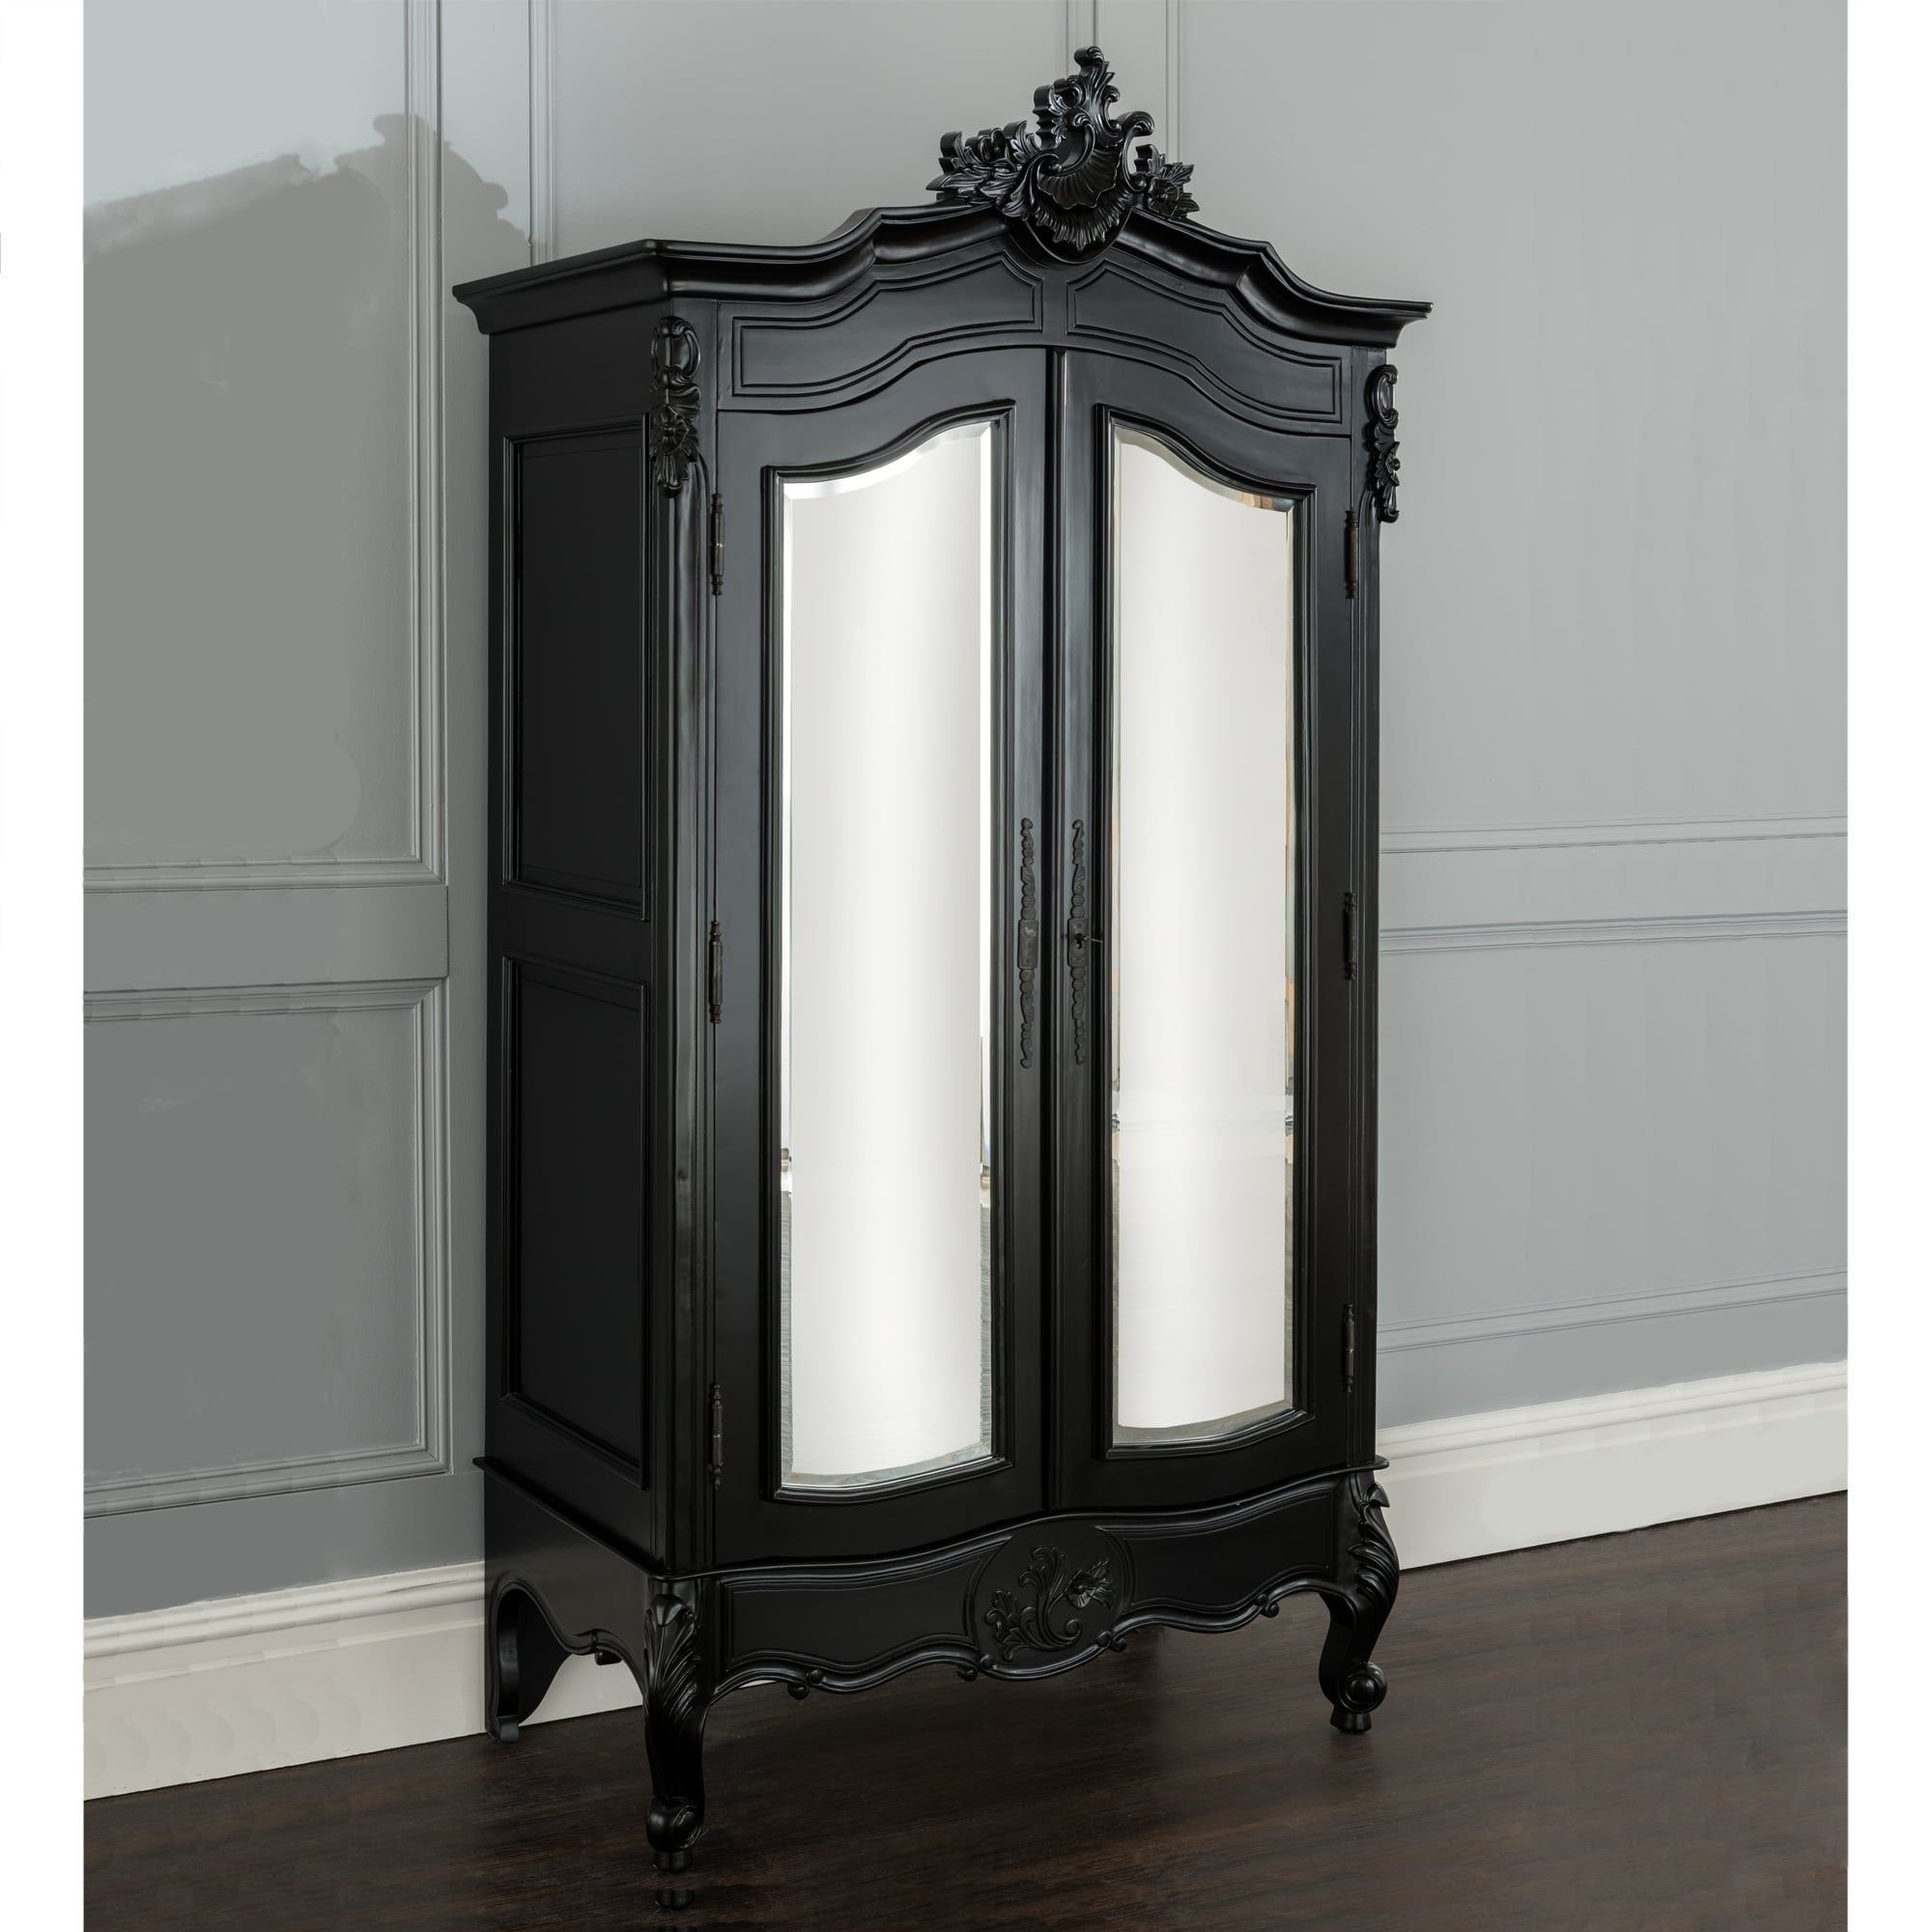 La Rochelle Antique French Wardrobe | Black Furniture Collection Pertaining To Black French Style Wardrobes (View 2 of 15)